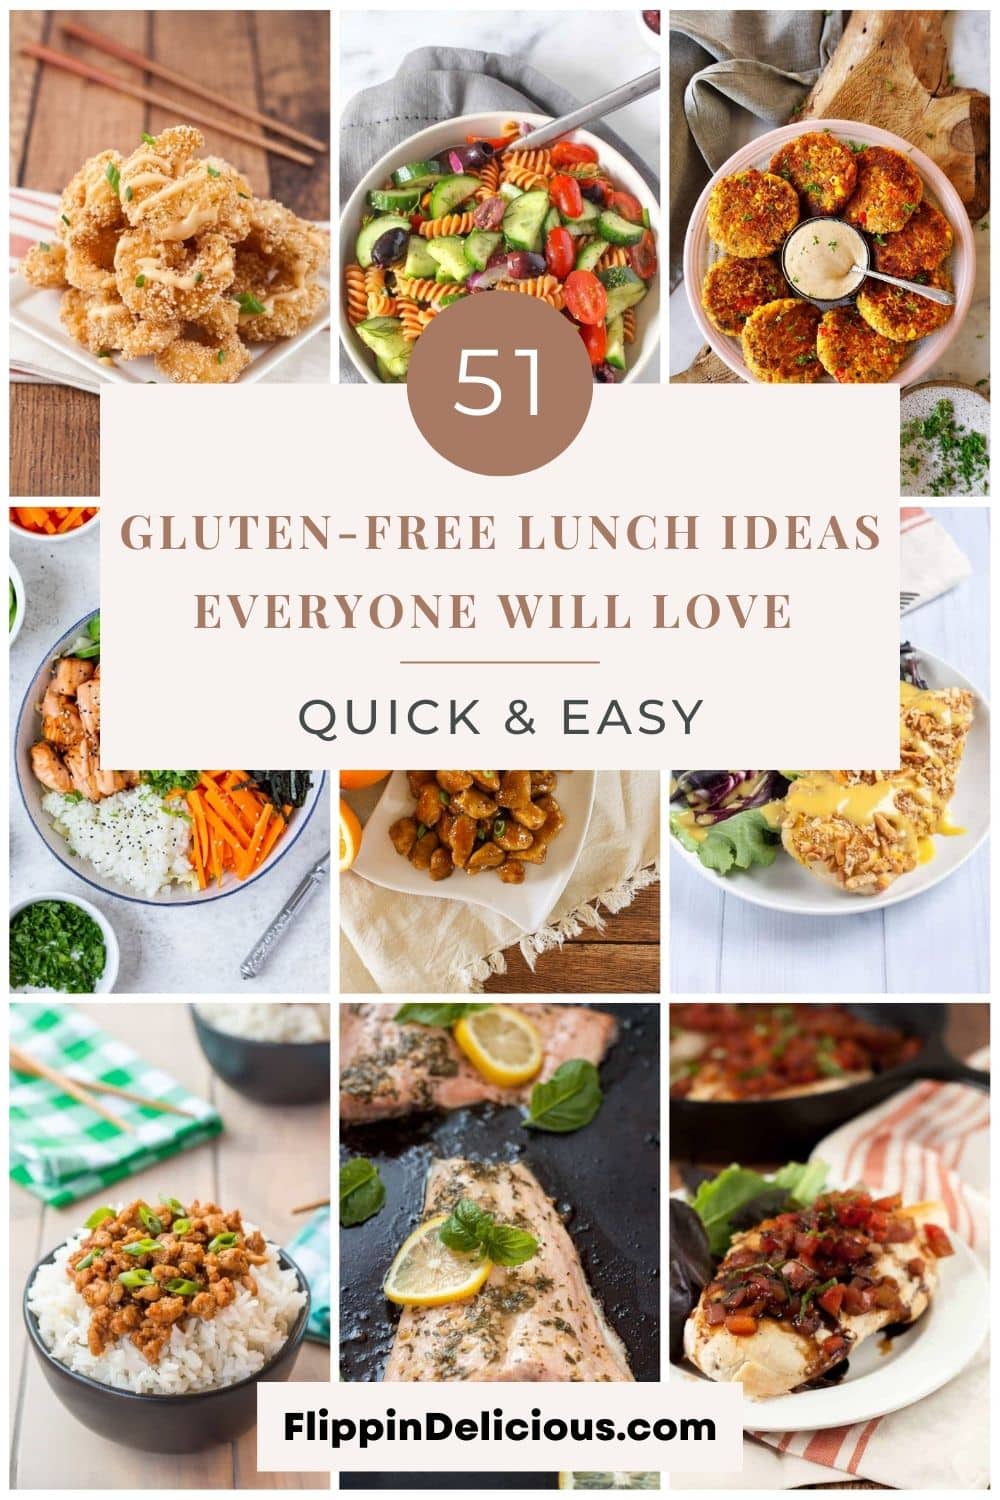 51 Gluten-Free Lunch Ideas Everyone Will Love (Quick & Easy) - Flippin ...